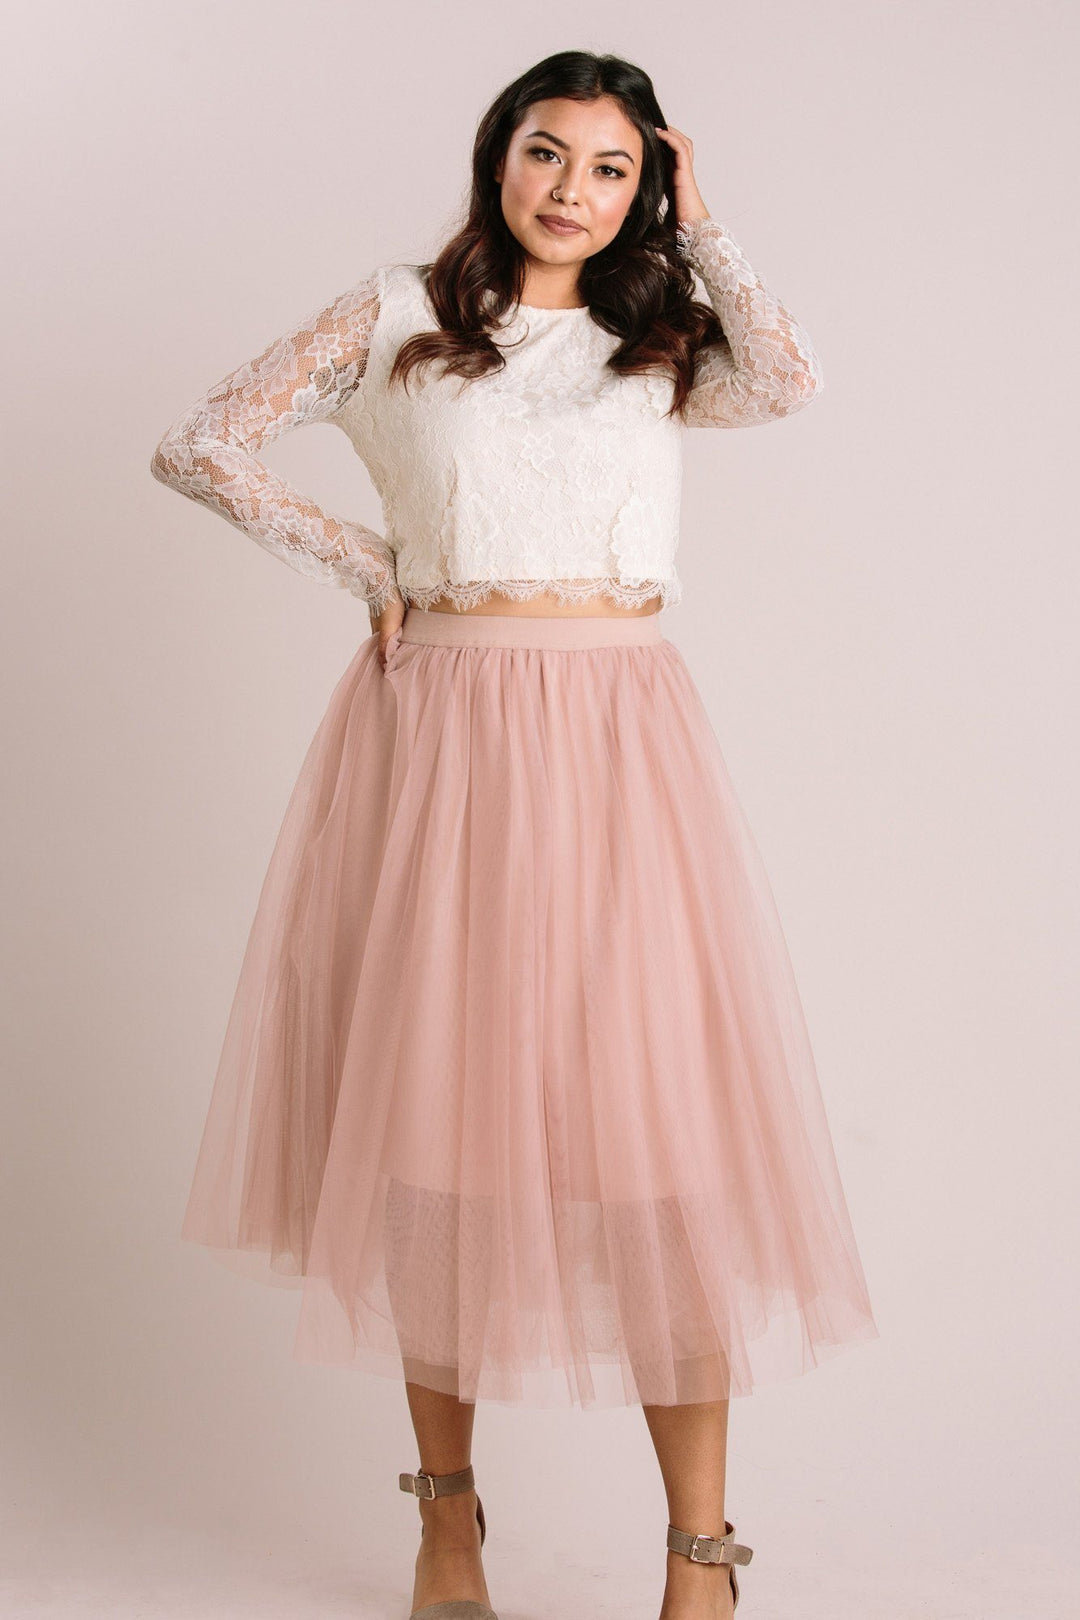 Pink Tulle Midi Skirt  Pink skirt outfits, Hot pink skirt outfit